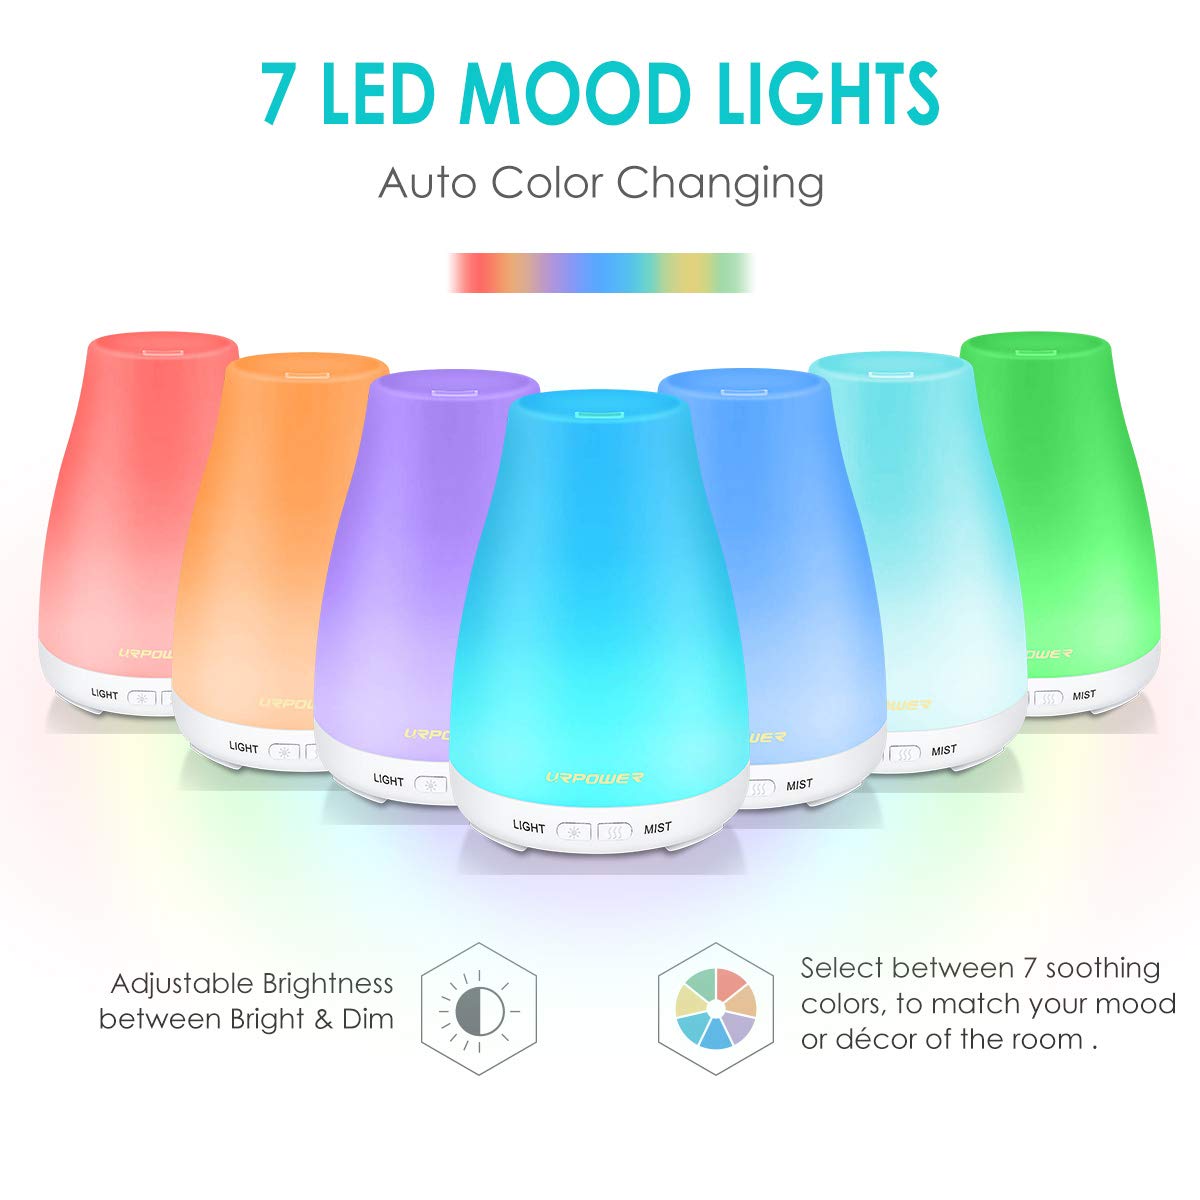 URPOWER 2nd Version Essential Oil Diffusers,Aroma Essential Oil Cool Mist Humidifier with Adjustable Mist Mode,Less Water Auto Shut-Off and 7 Color Lights Changing for Home Office Baby